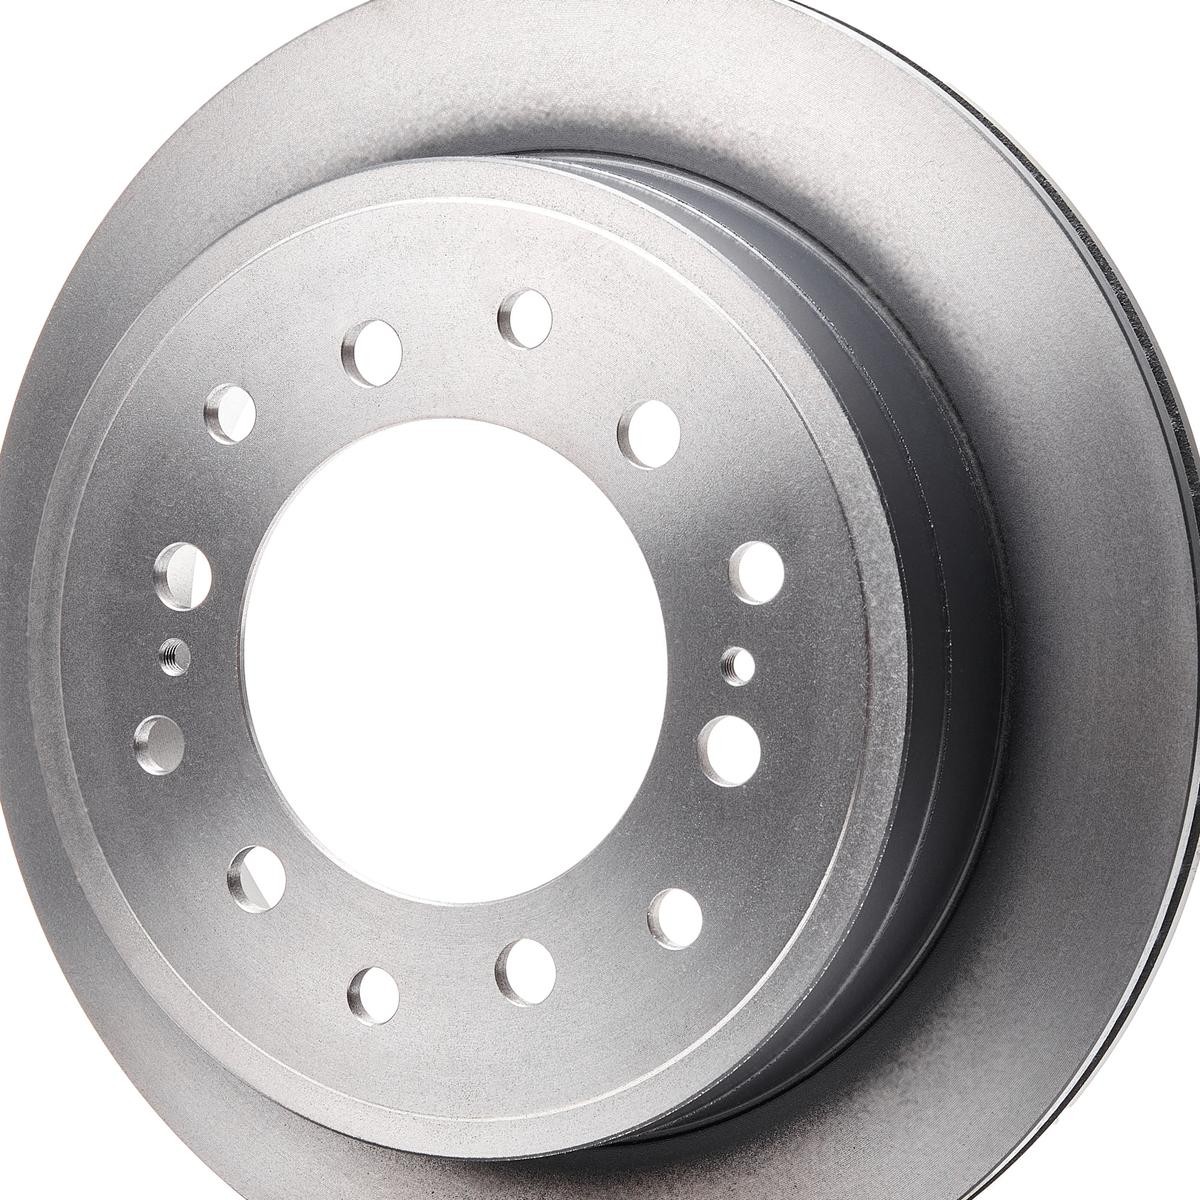 Brake disc DF4484 from TRW